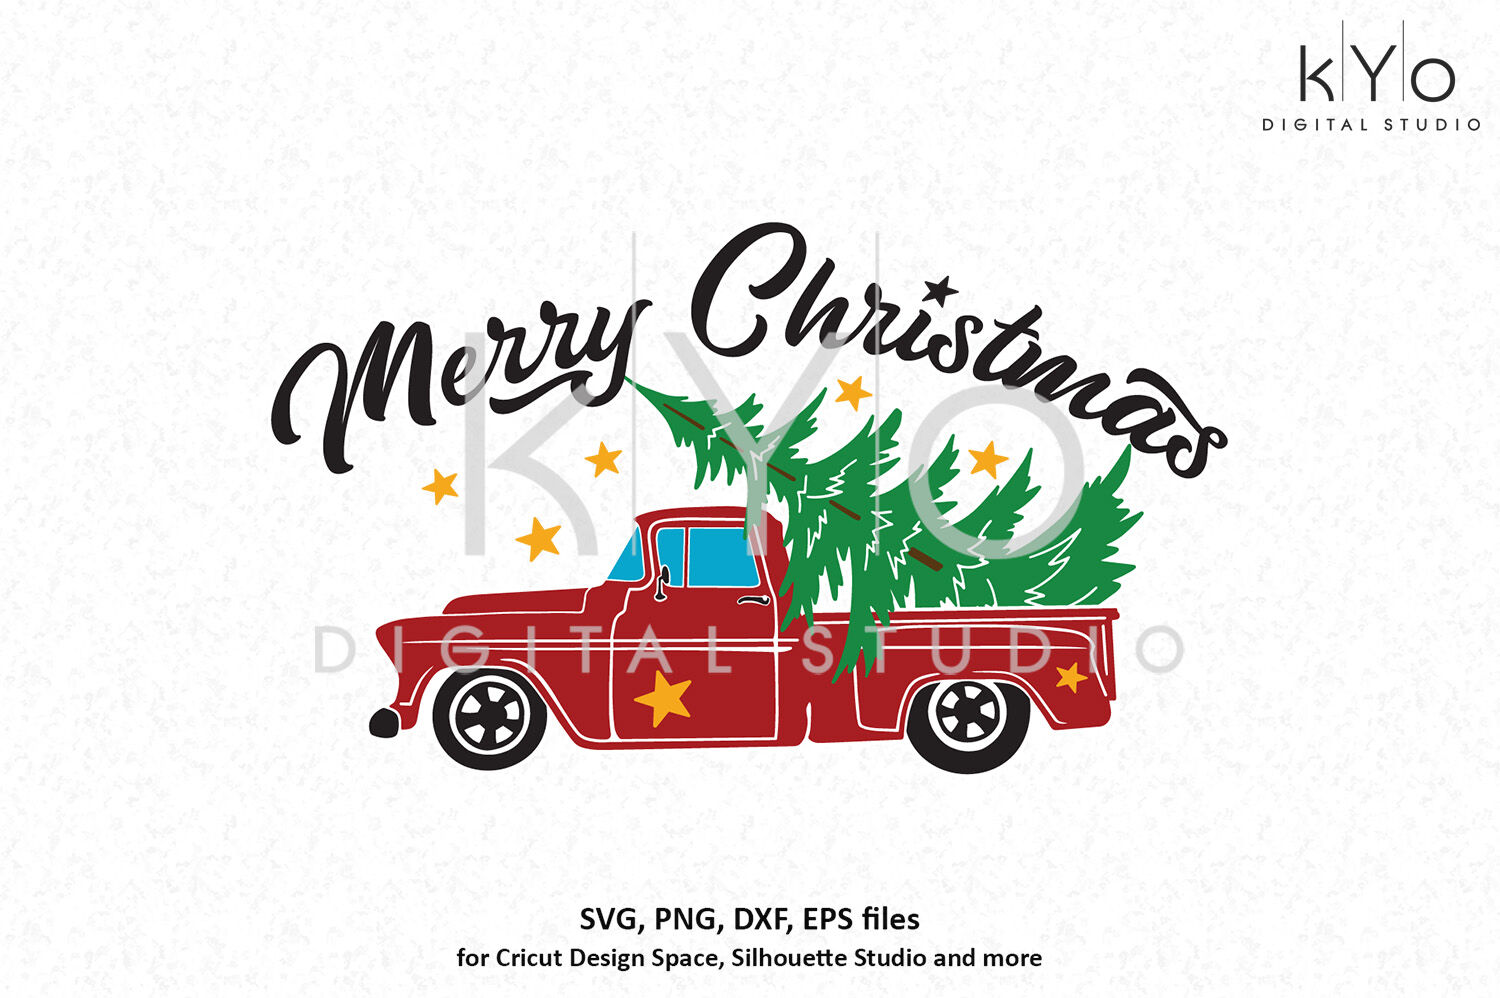 ori 3657949 5r49alf8uxydzrk0tthmh8ge5kyn2cxumimw6rn8 merry christmas red old truck with tree svg png dxf files